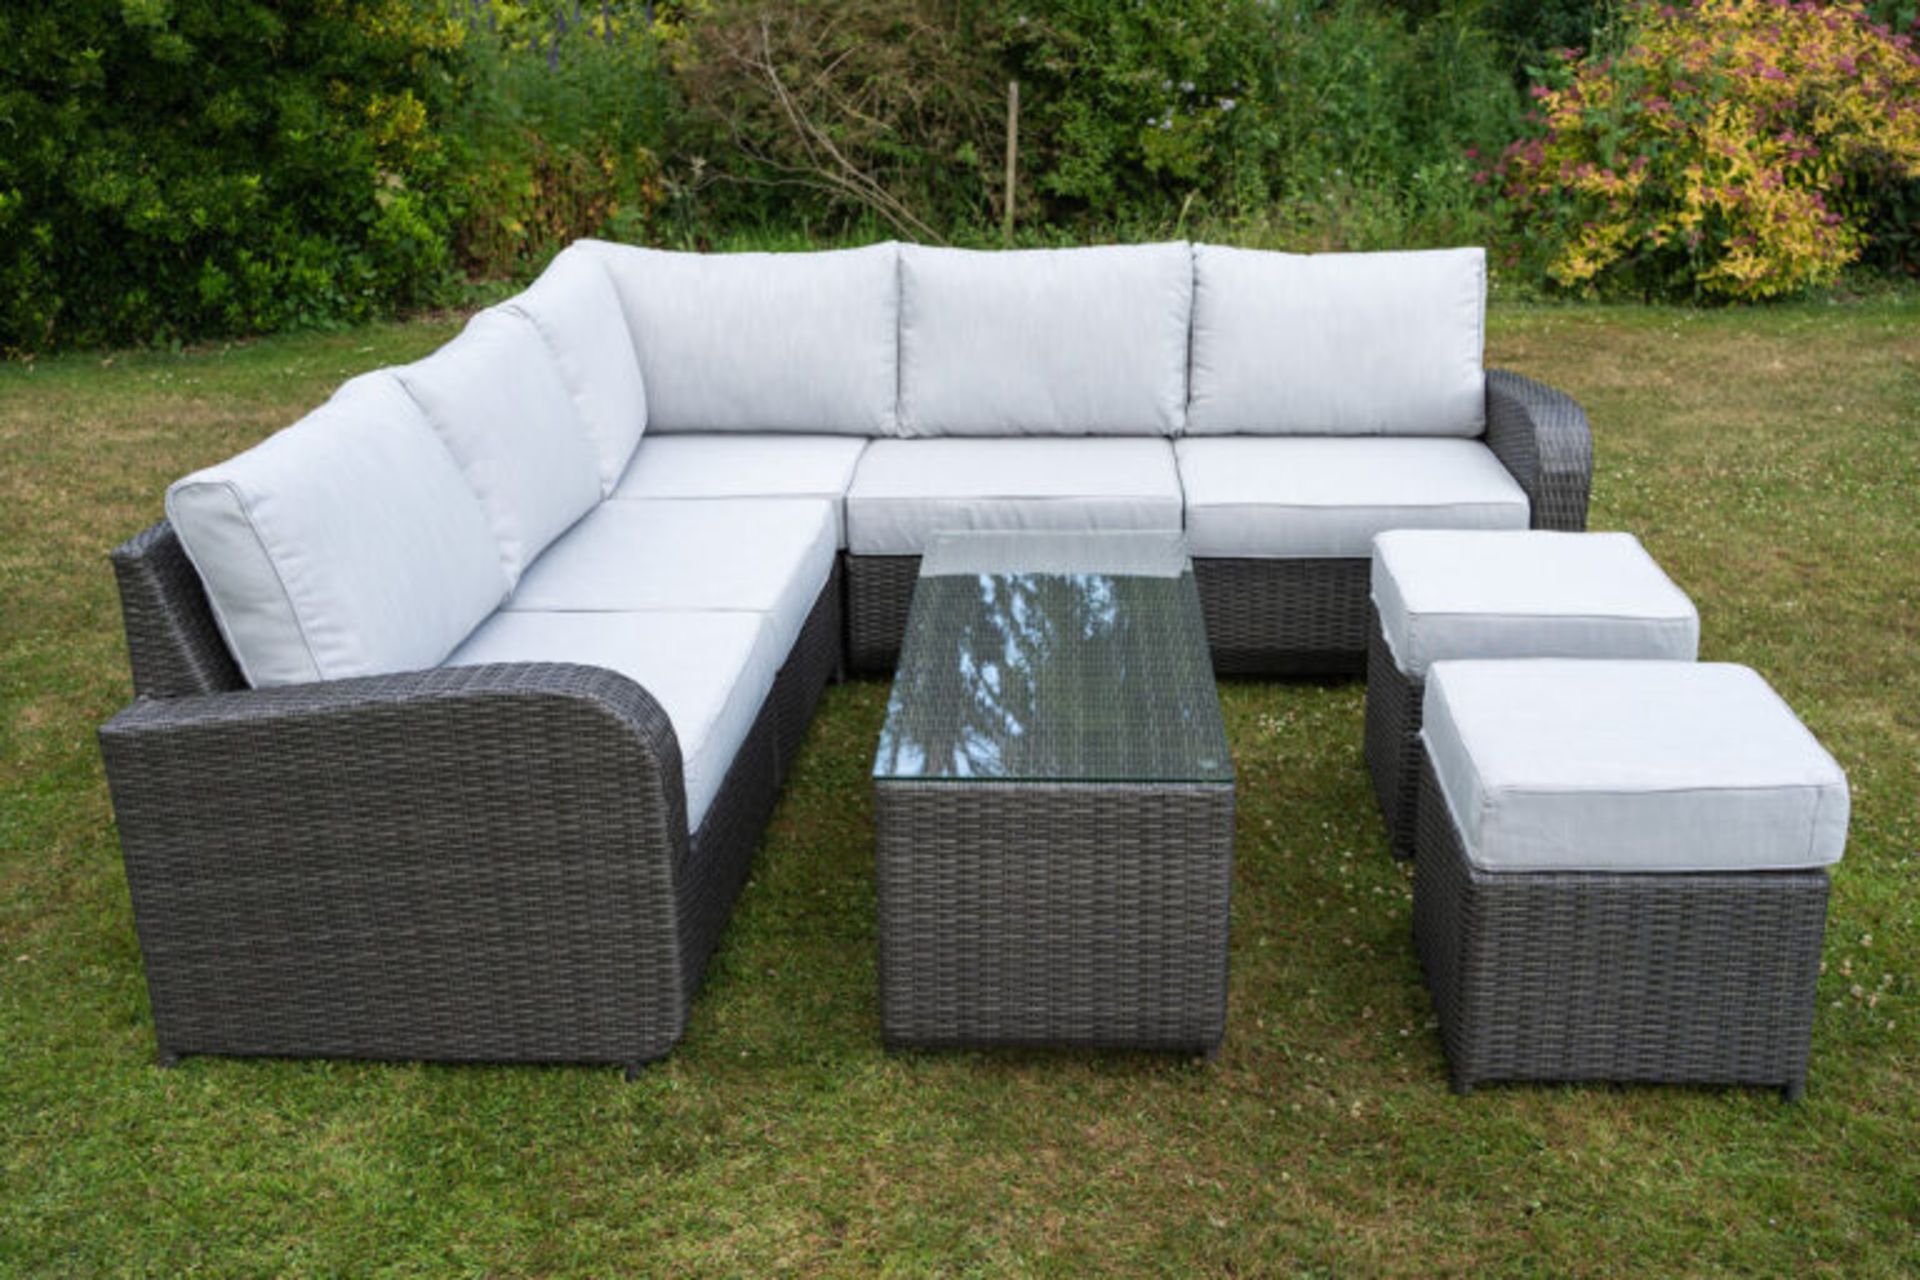 3 X Brand New Moda Furniture 8 Seater Corner Group With Coffee Table in Natural with Cream Cushion - Image 2 of 6